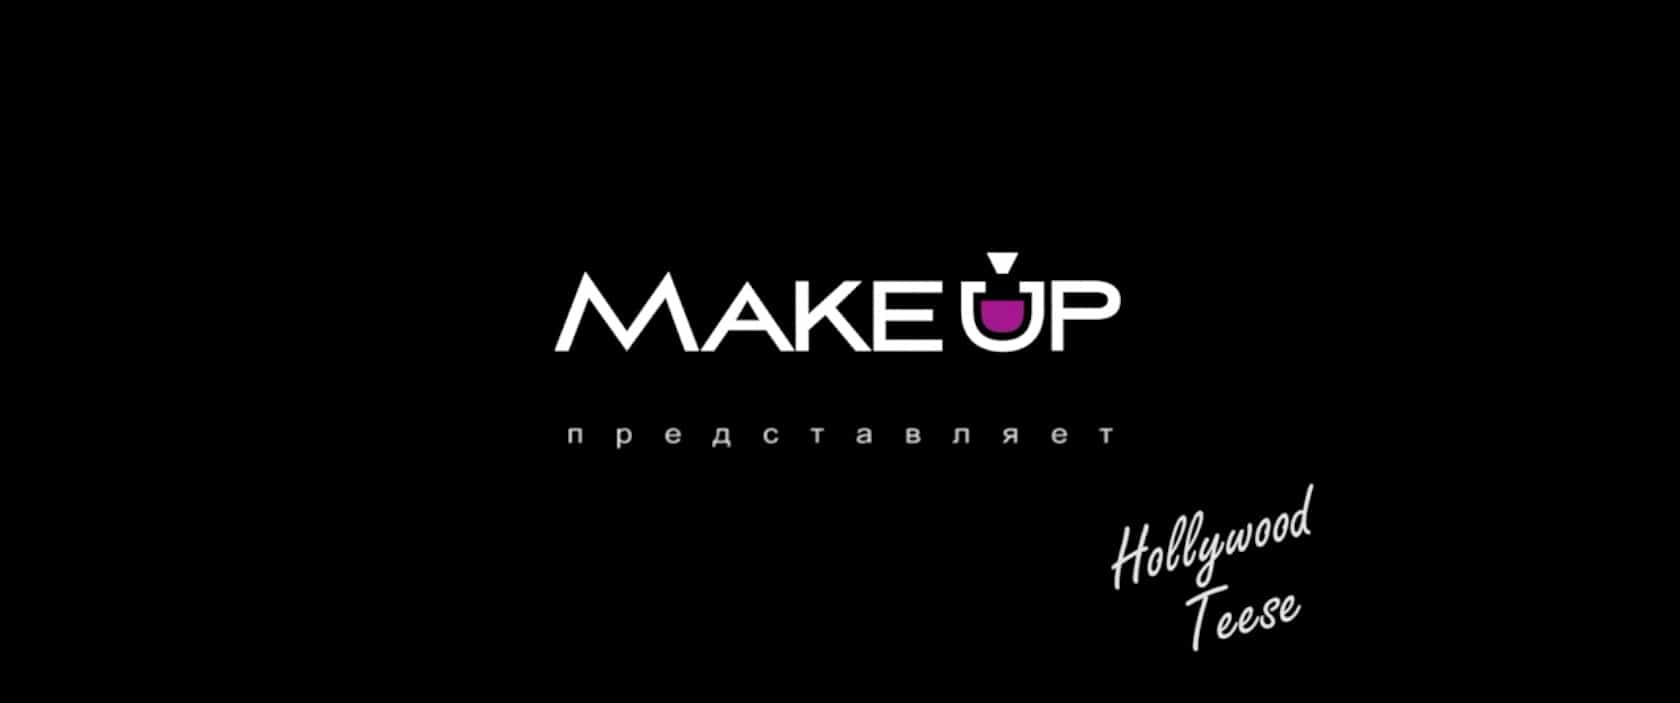 Case video review of cosmetics" Backstage photo shoot Make up"